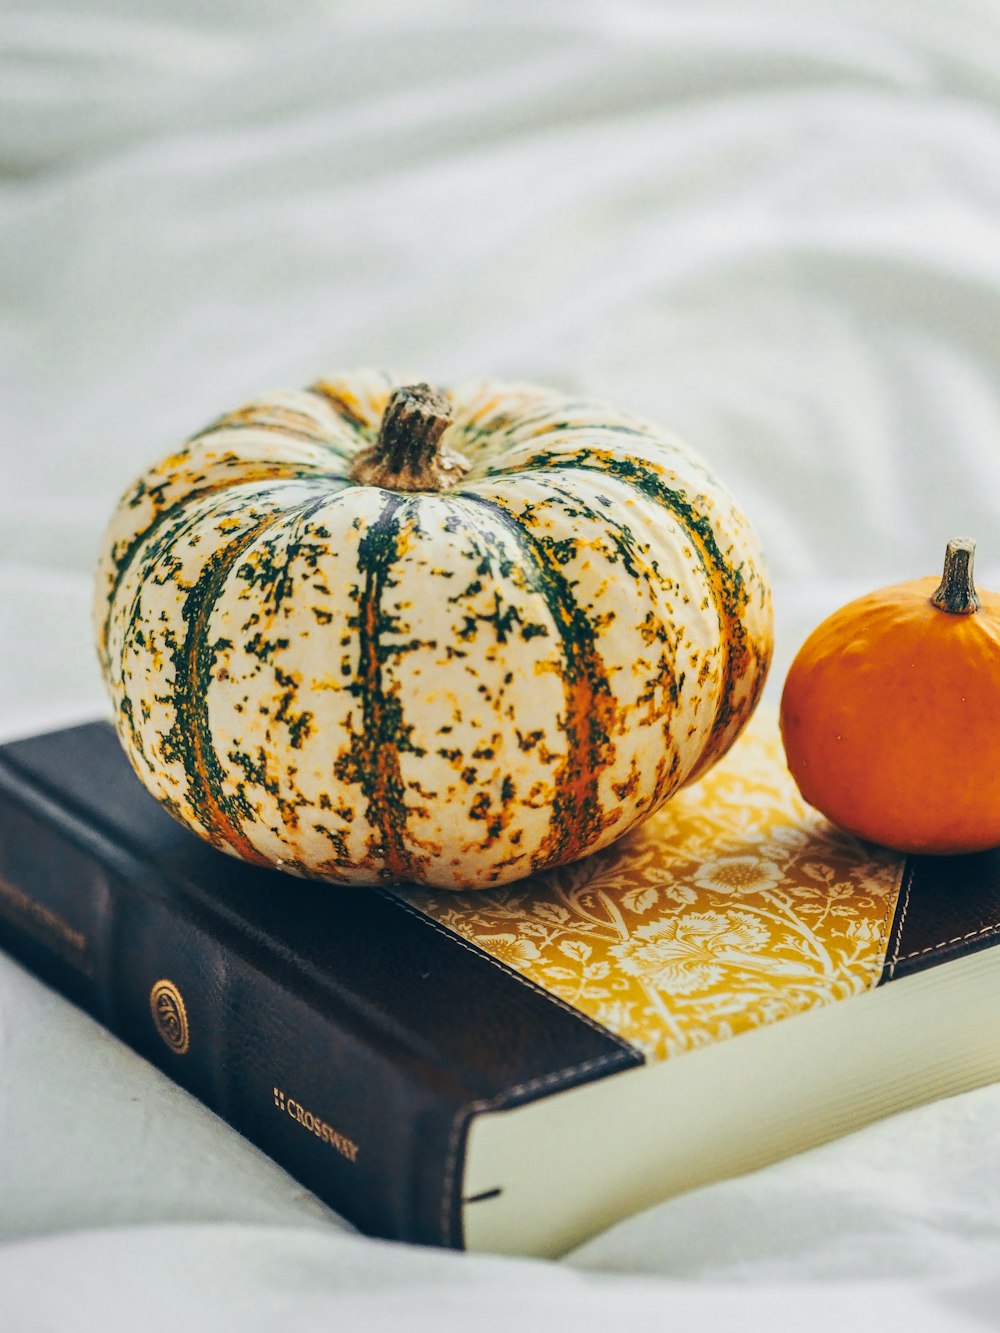 orange and green pumpkin on white and blue floral table cloth